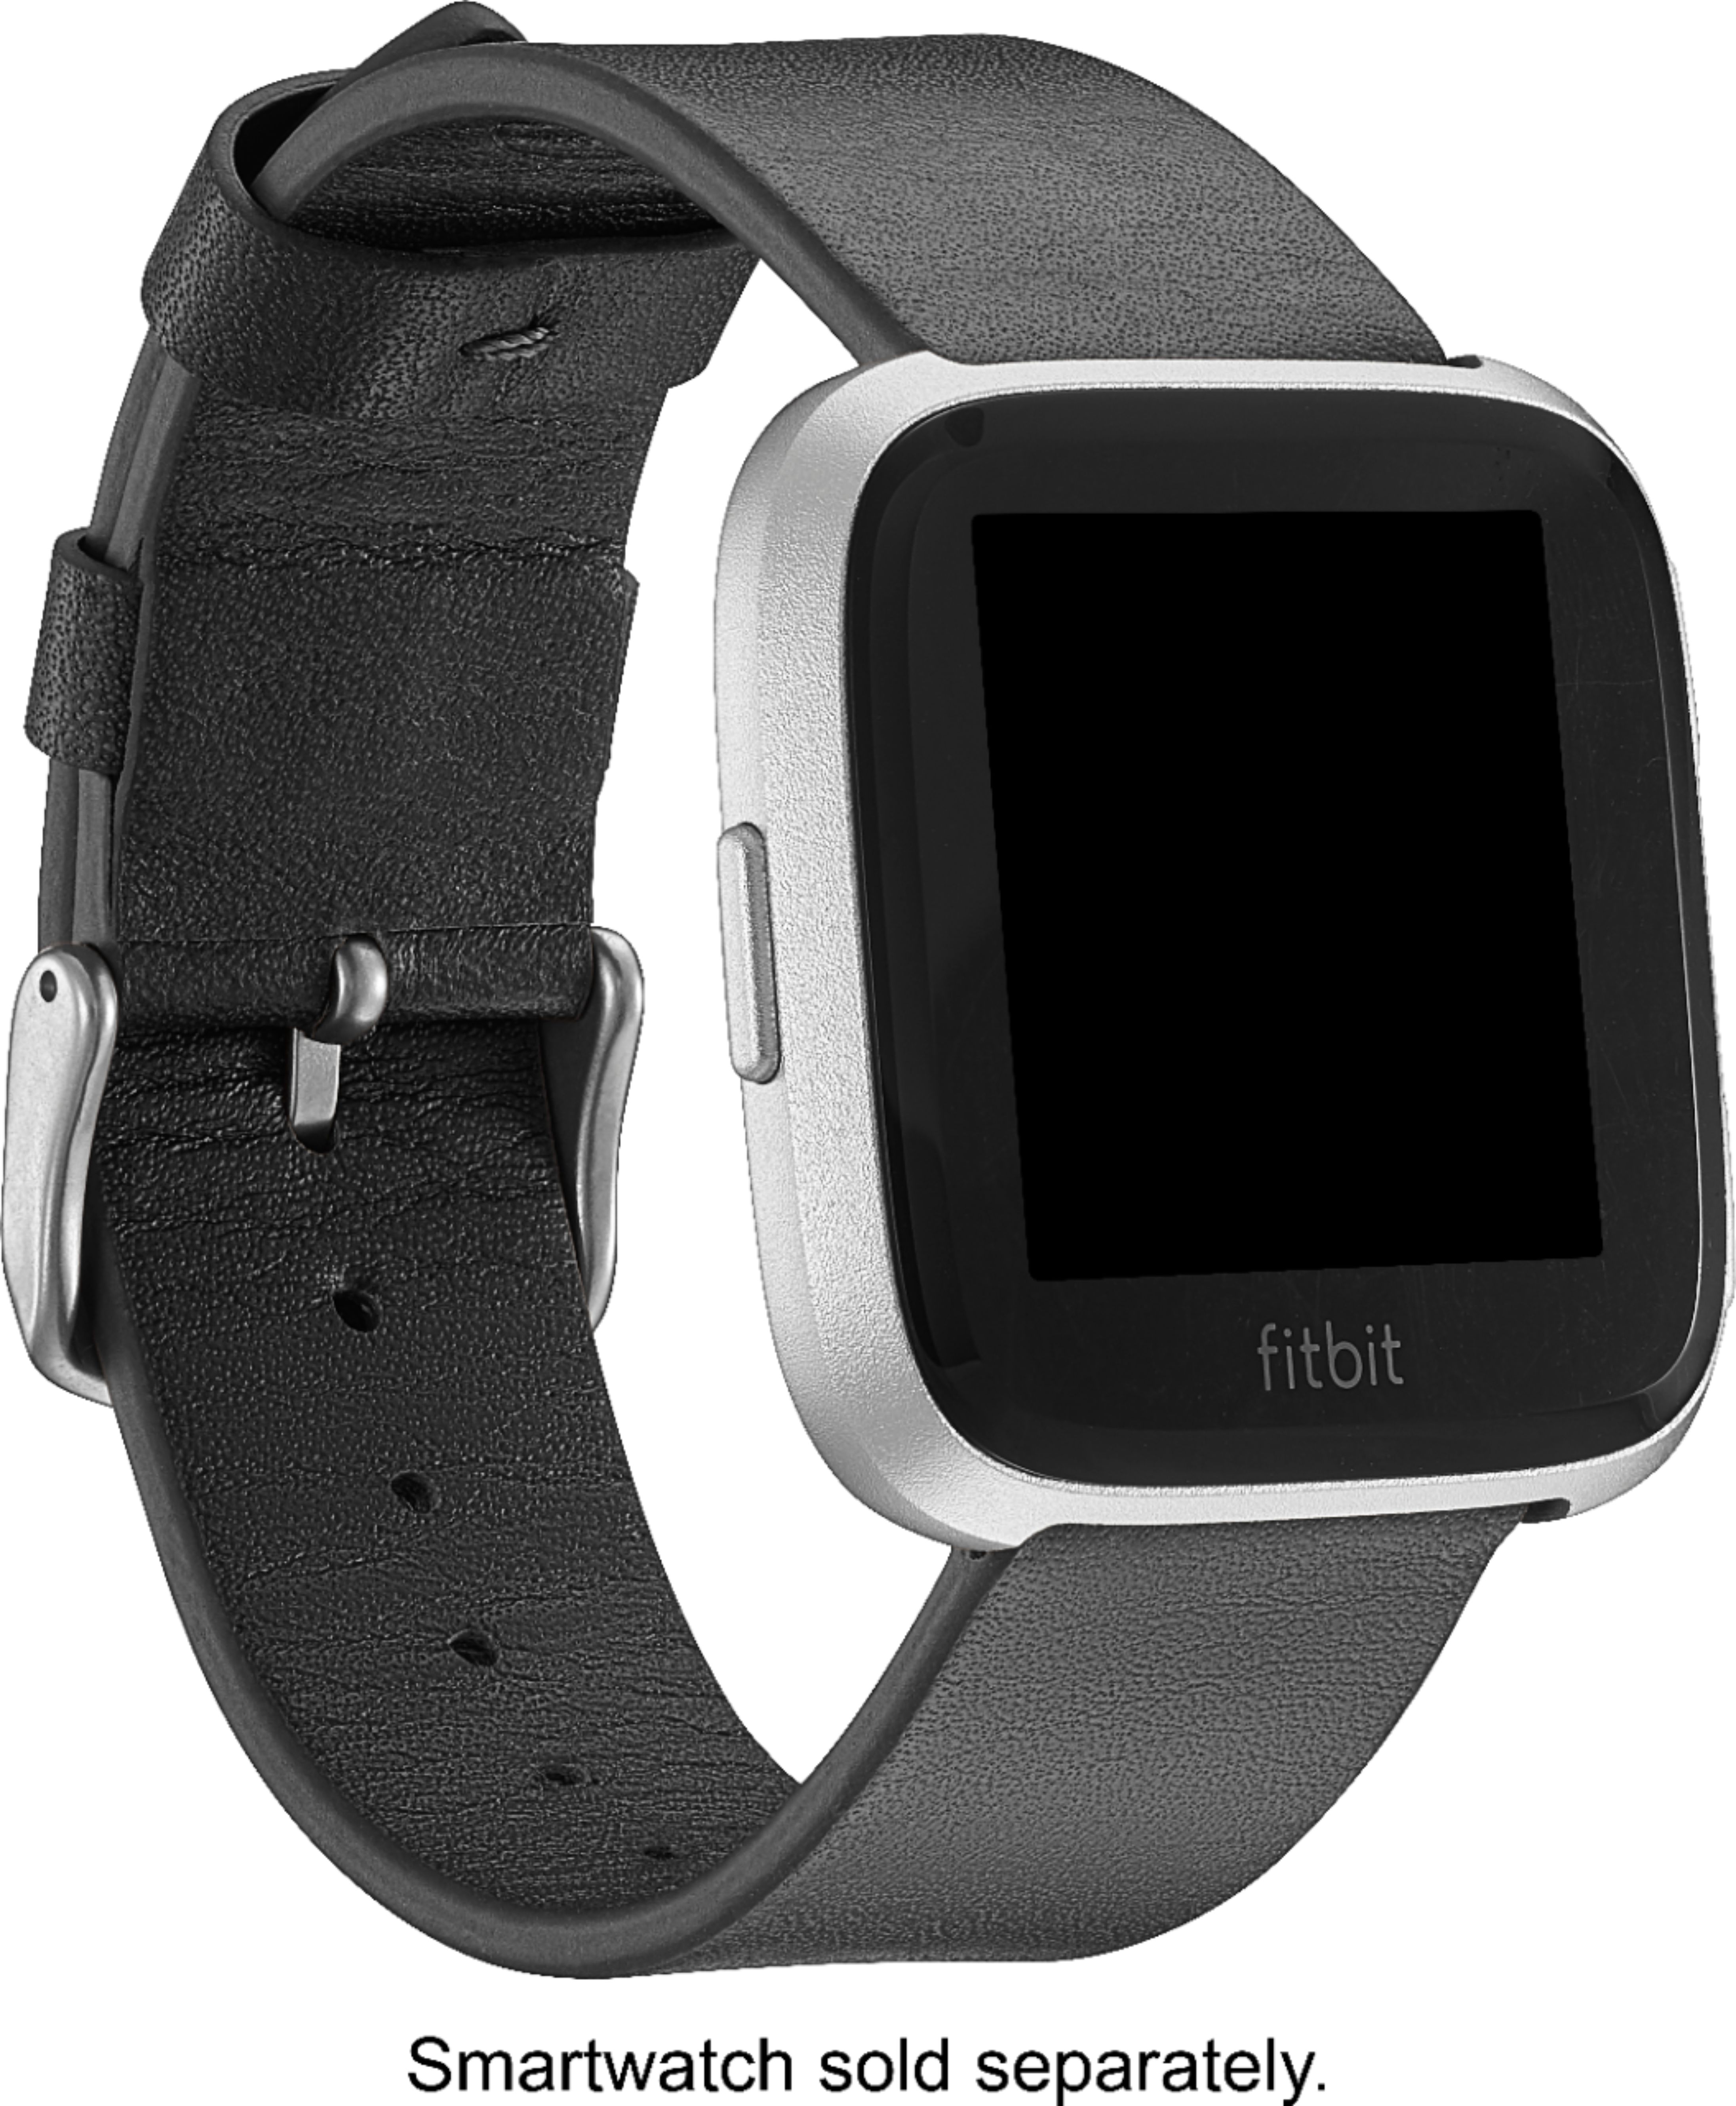 Best Buy: Platinum™ Horween Leather Watch Band for Fitbit Versa 2 ...